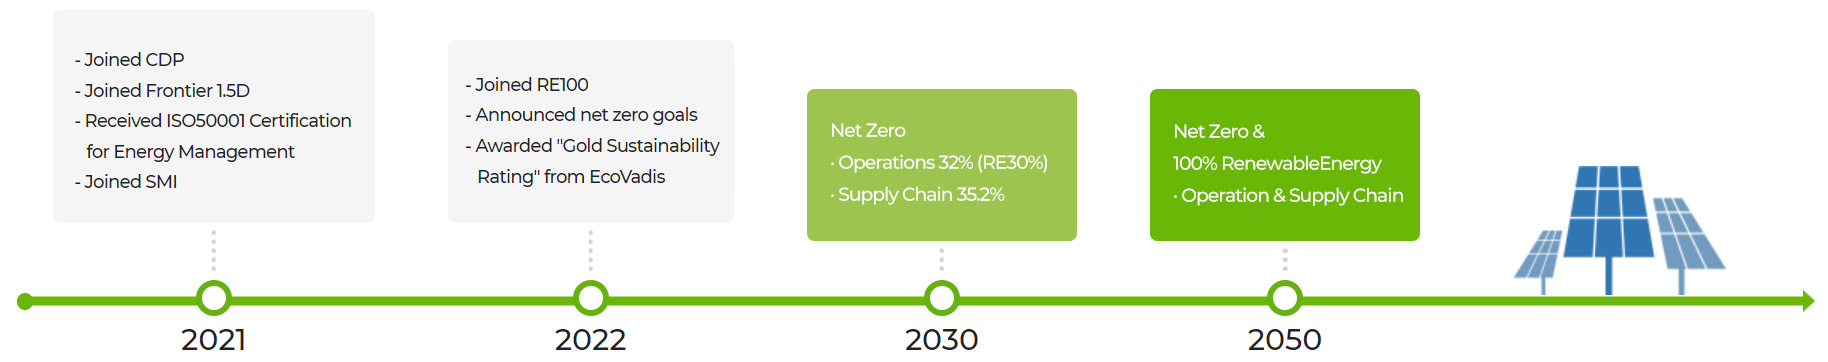 2021 - joined CDP, joined Frontier 1.5d, Received ISO50001 Certification for Energy Management, Joined SMI / 2022 - Joined RE100, Announced net zero goals, Awarded Gold Sustainability Rating from EcoVadis / 2030 - Net Zero, Operations 32%(RE30%), Supply Chain 35.2% / 2050 - Net Zero & 100% Renewable Energy, Operation & Supply Chain